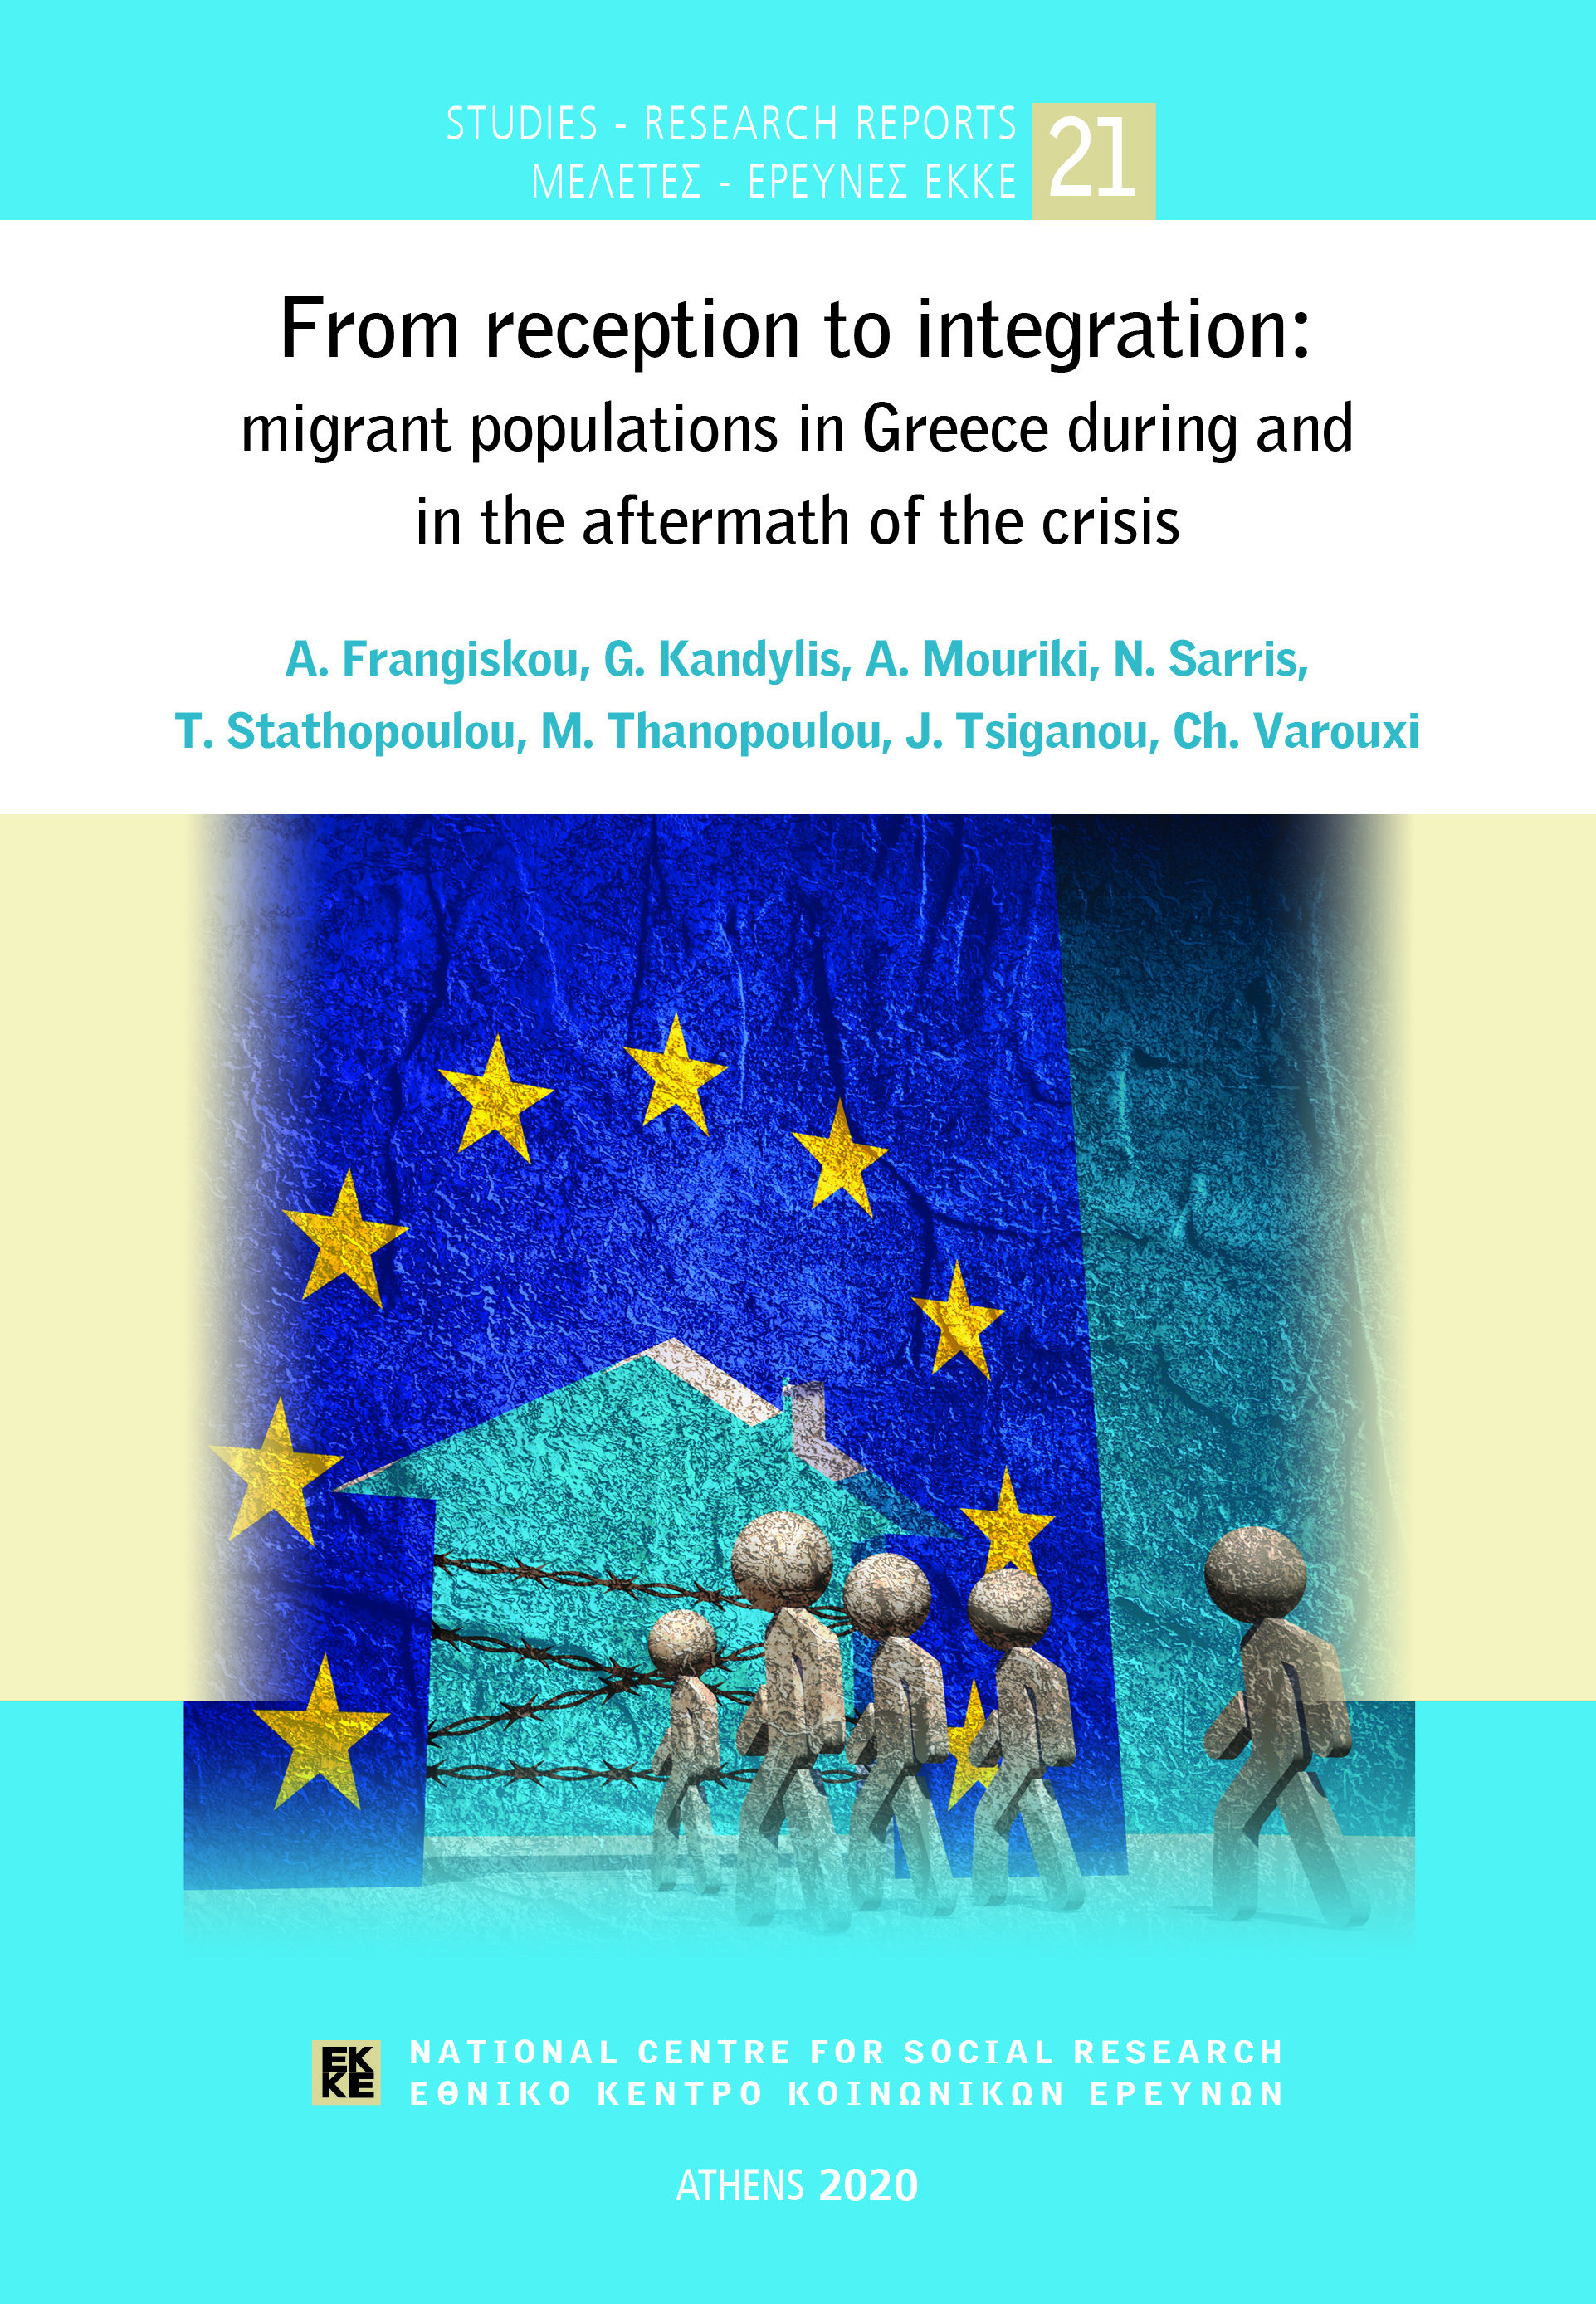 From reception to integration: migrant populations in Greece during and in the aftermath of the crisis